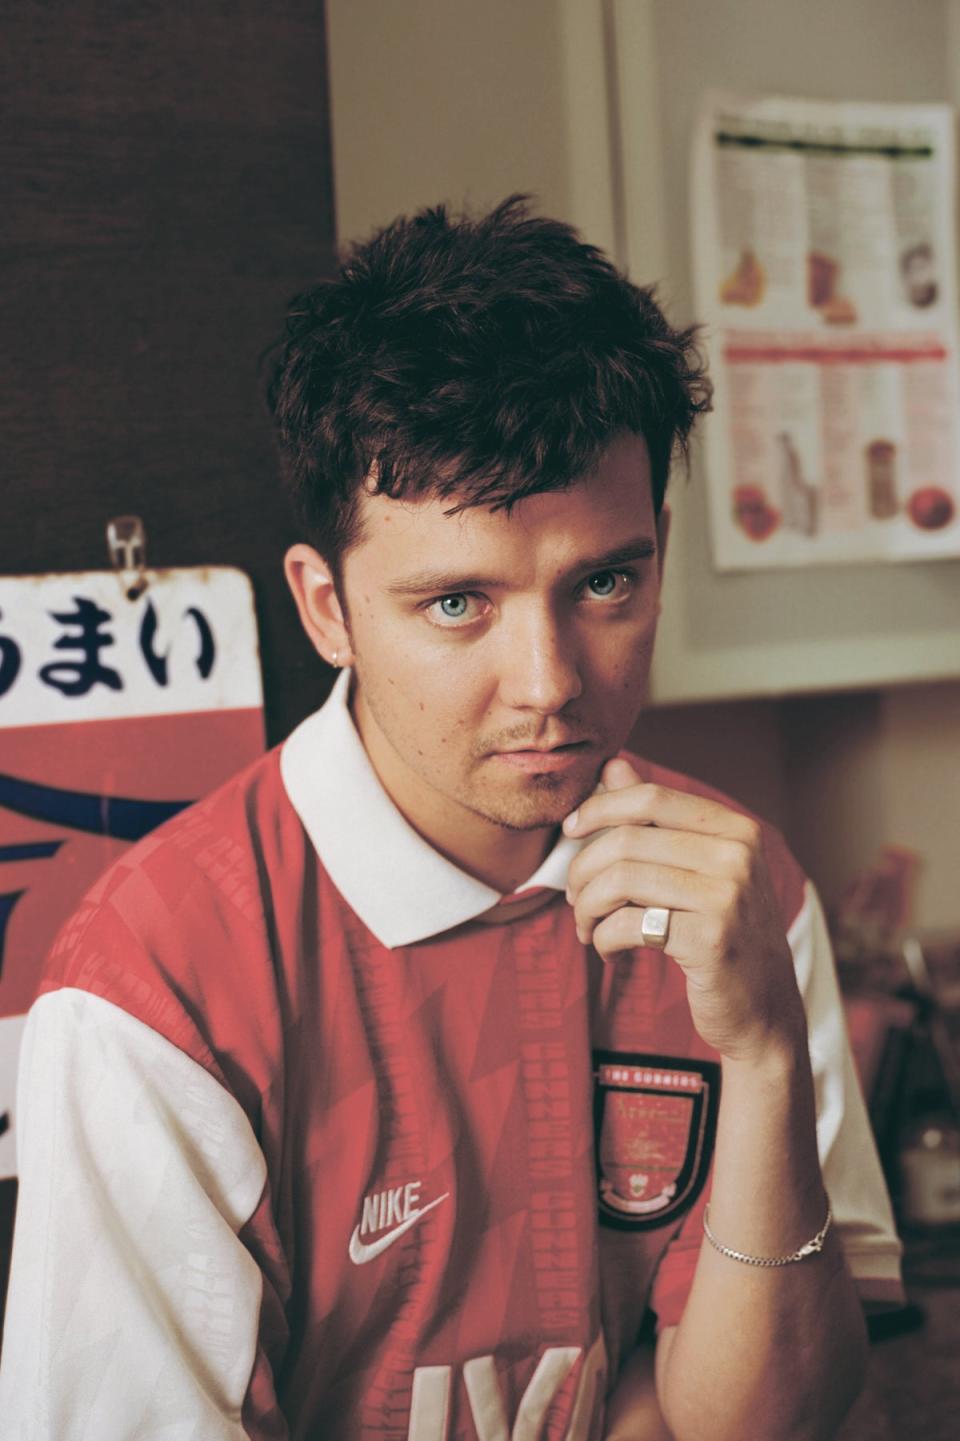 Bever and Asa Butterfield met at a house party and ended up doing an Arsenal shirt shoot (Louis Bever)